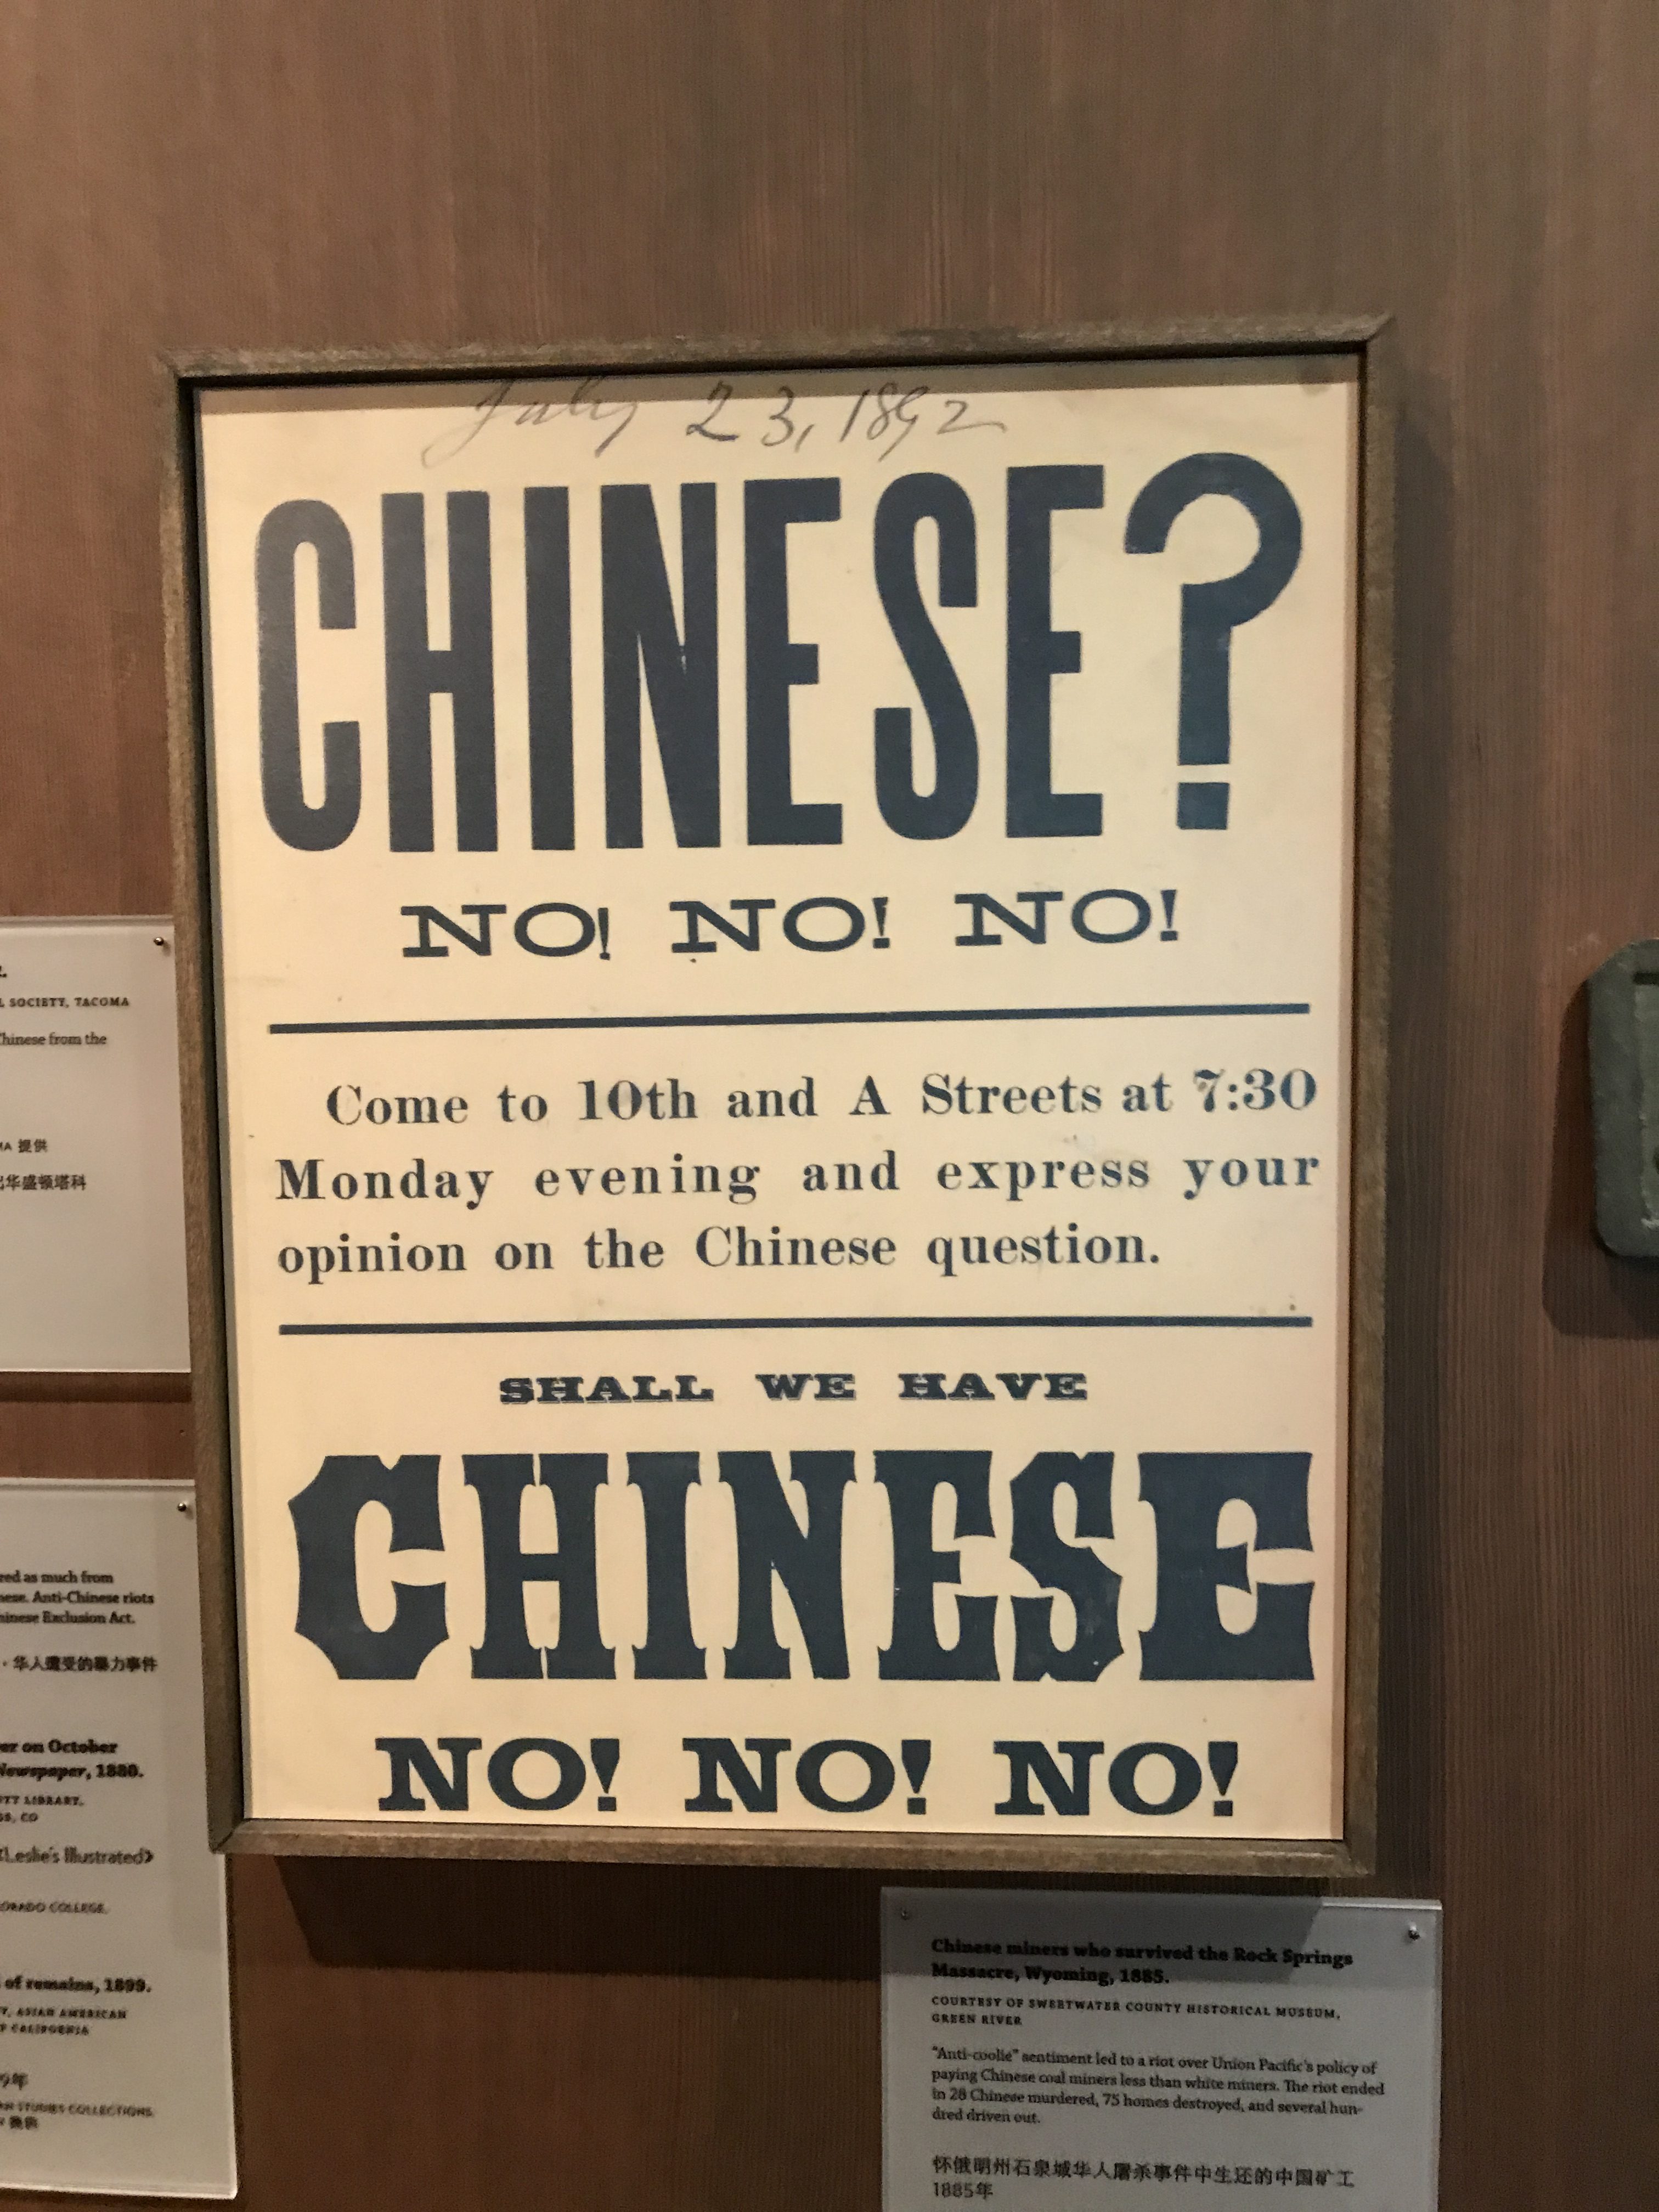 historical poster advertising meeting against Chinese